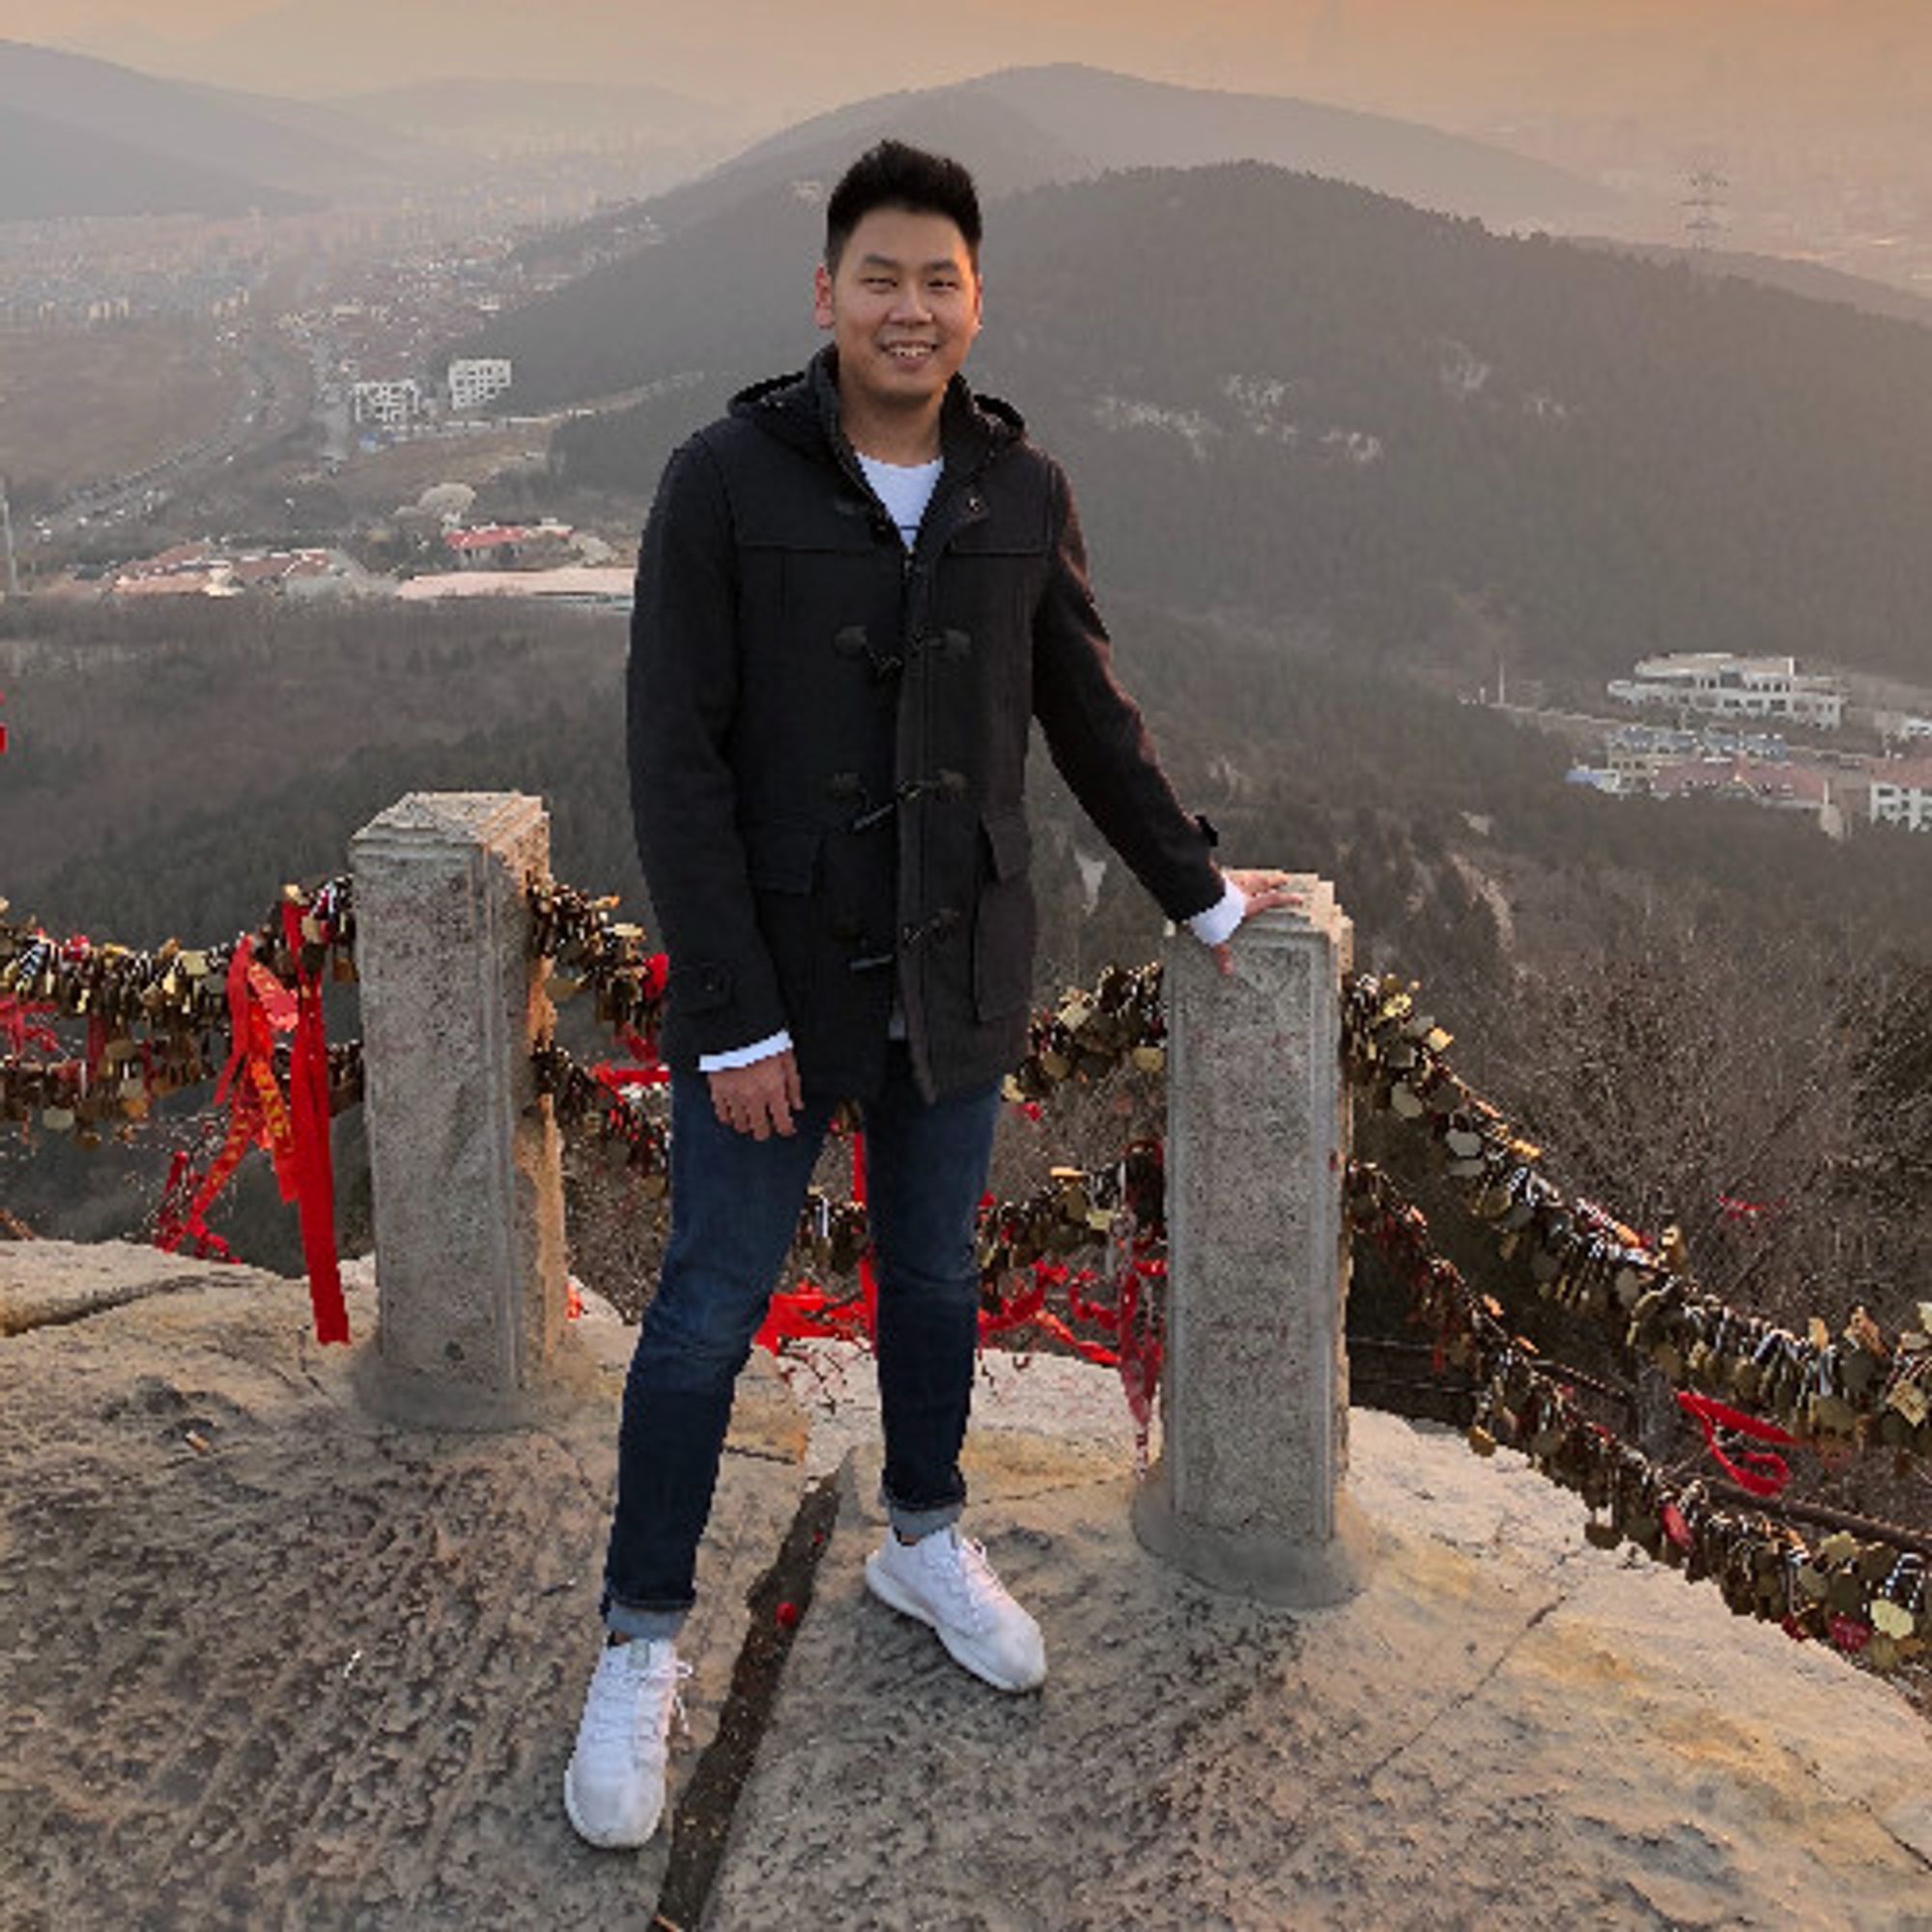 Guangsha Mou
Software Engineer
Prior Senior Software Engineer @Airbnb • Loves all marvel movies, anime (One Piece!), video games (overwatch), hiking, pool, watching nba